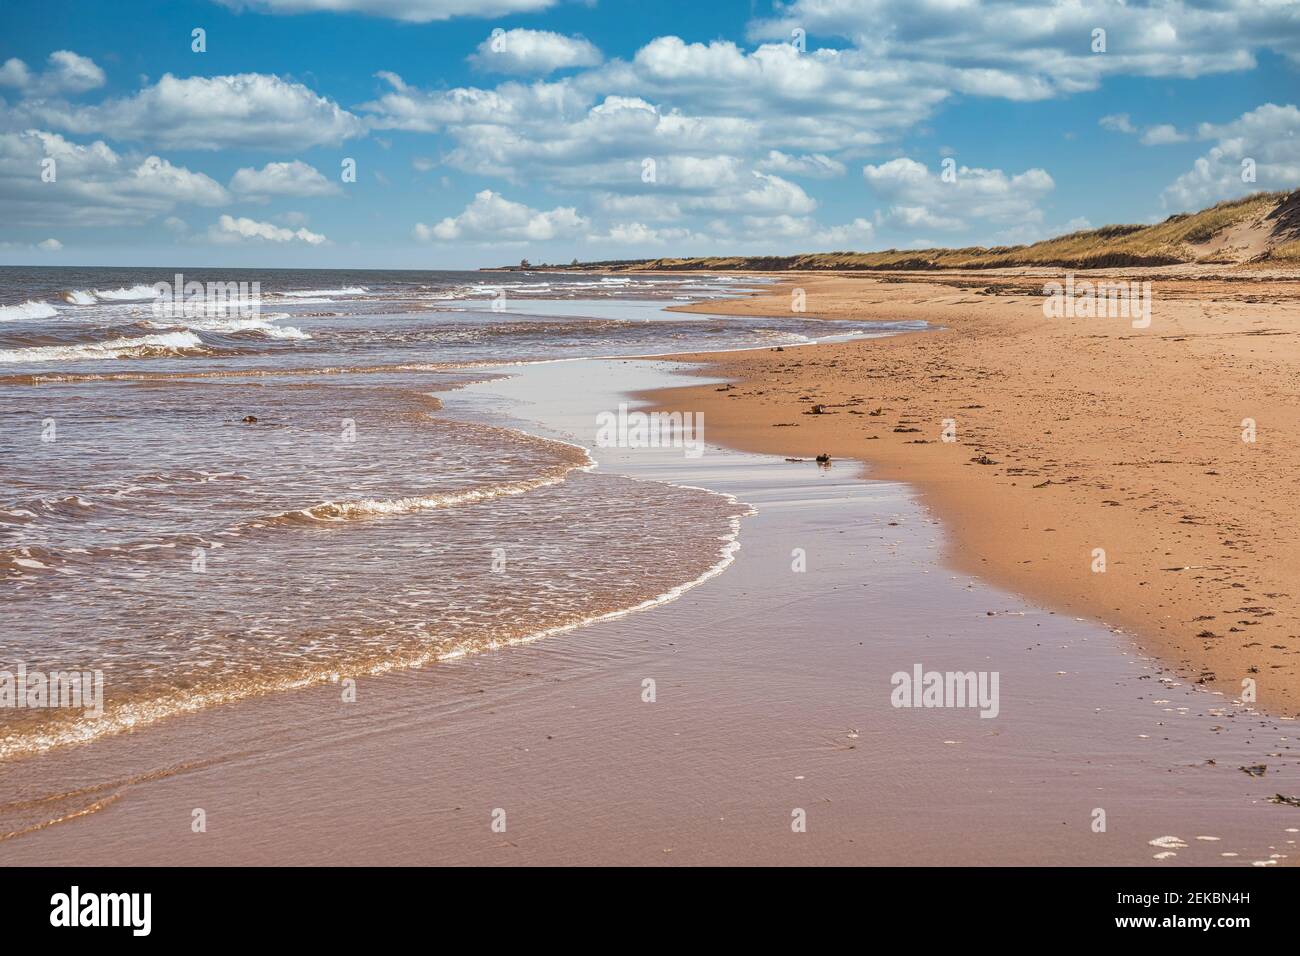 Waves lap up on a sandy beach on the north shore of Prince Edward Island, Canada. Stock Photo